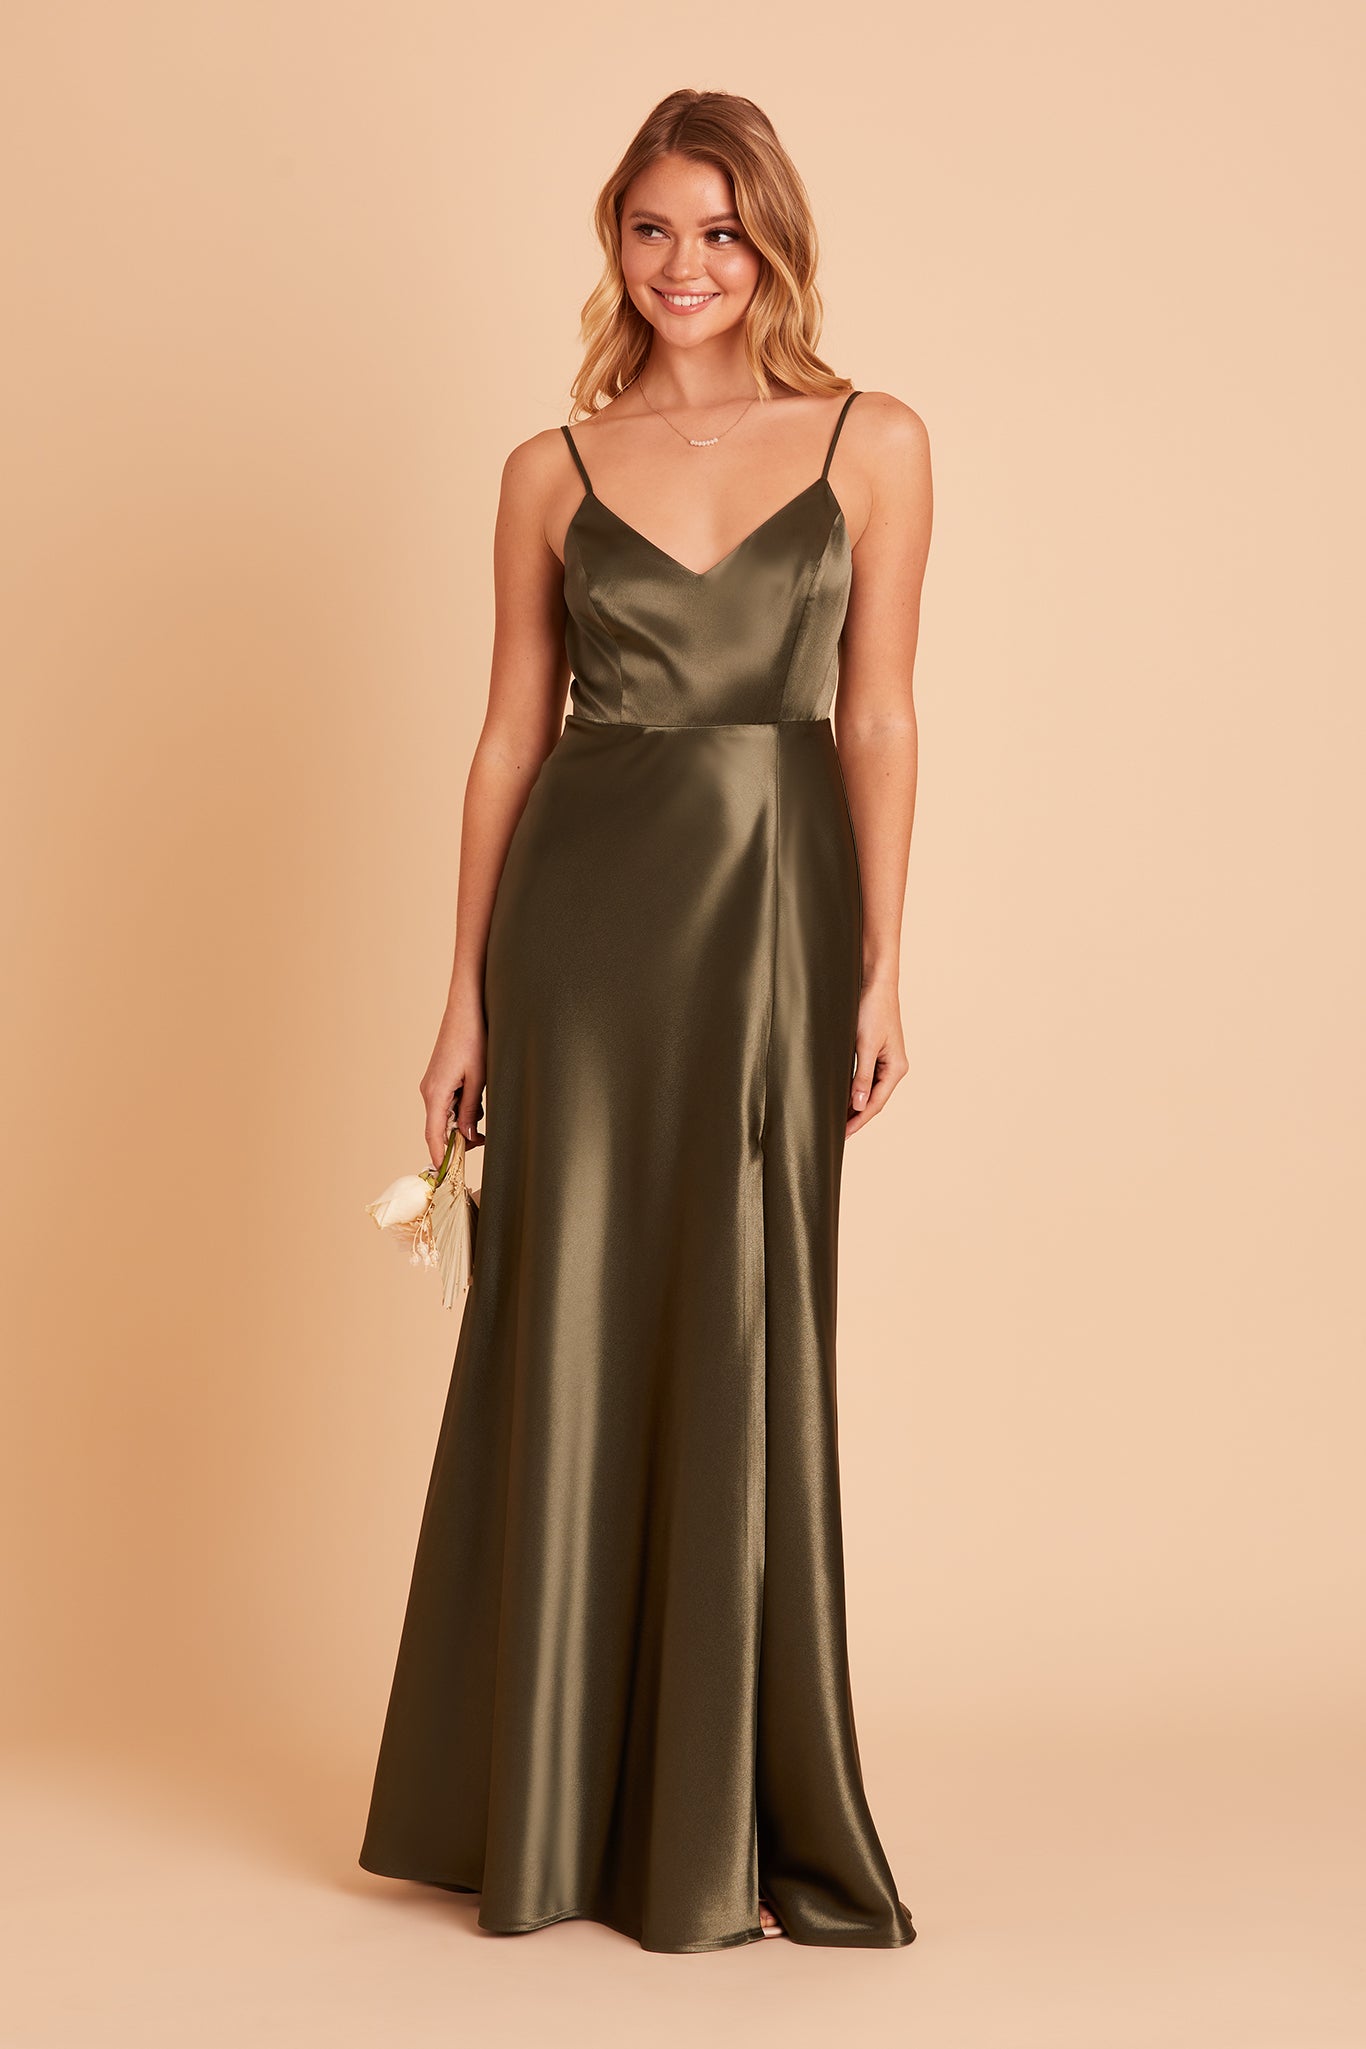 Jay bridesmaid dress with slit in olive satin by Birdy Grey, front view